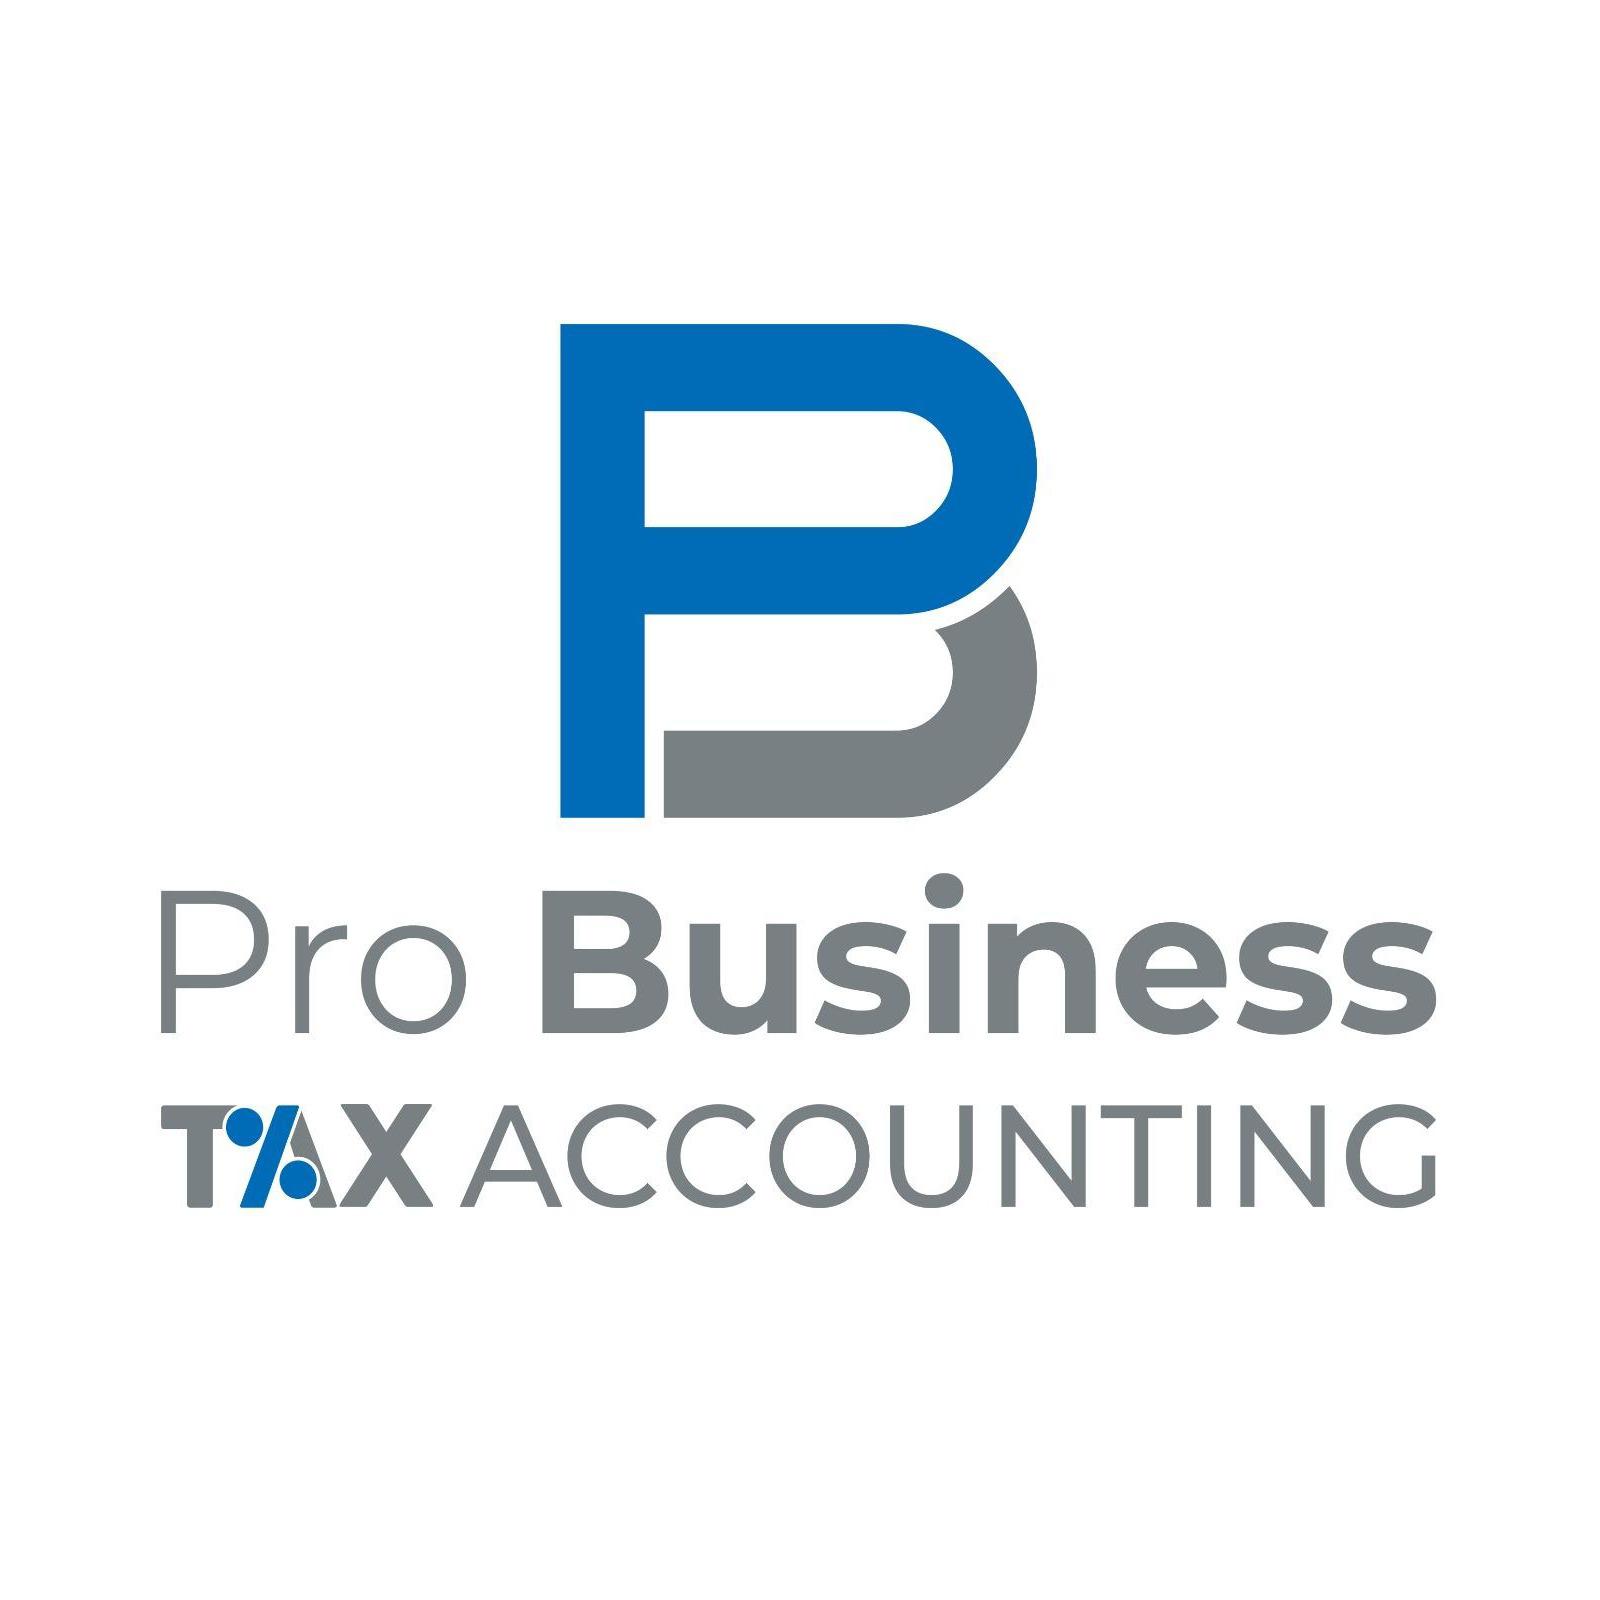 Pro Business Tax And Accounting - Vaughan, ON L4K 3Y4 - (647)236-8400 | ShowMeLocal.com